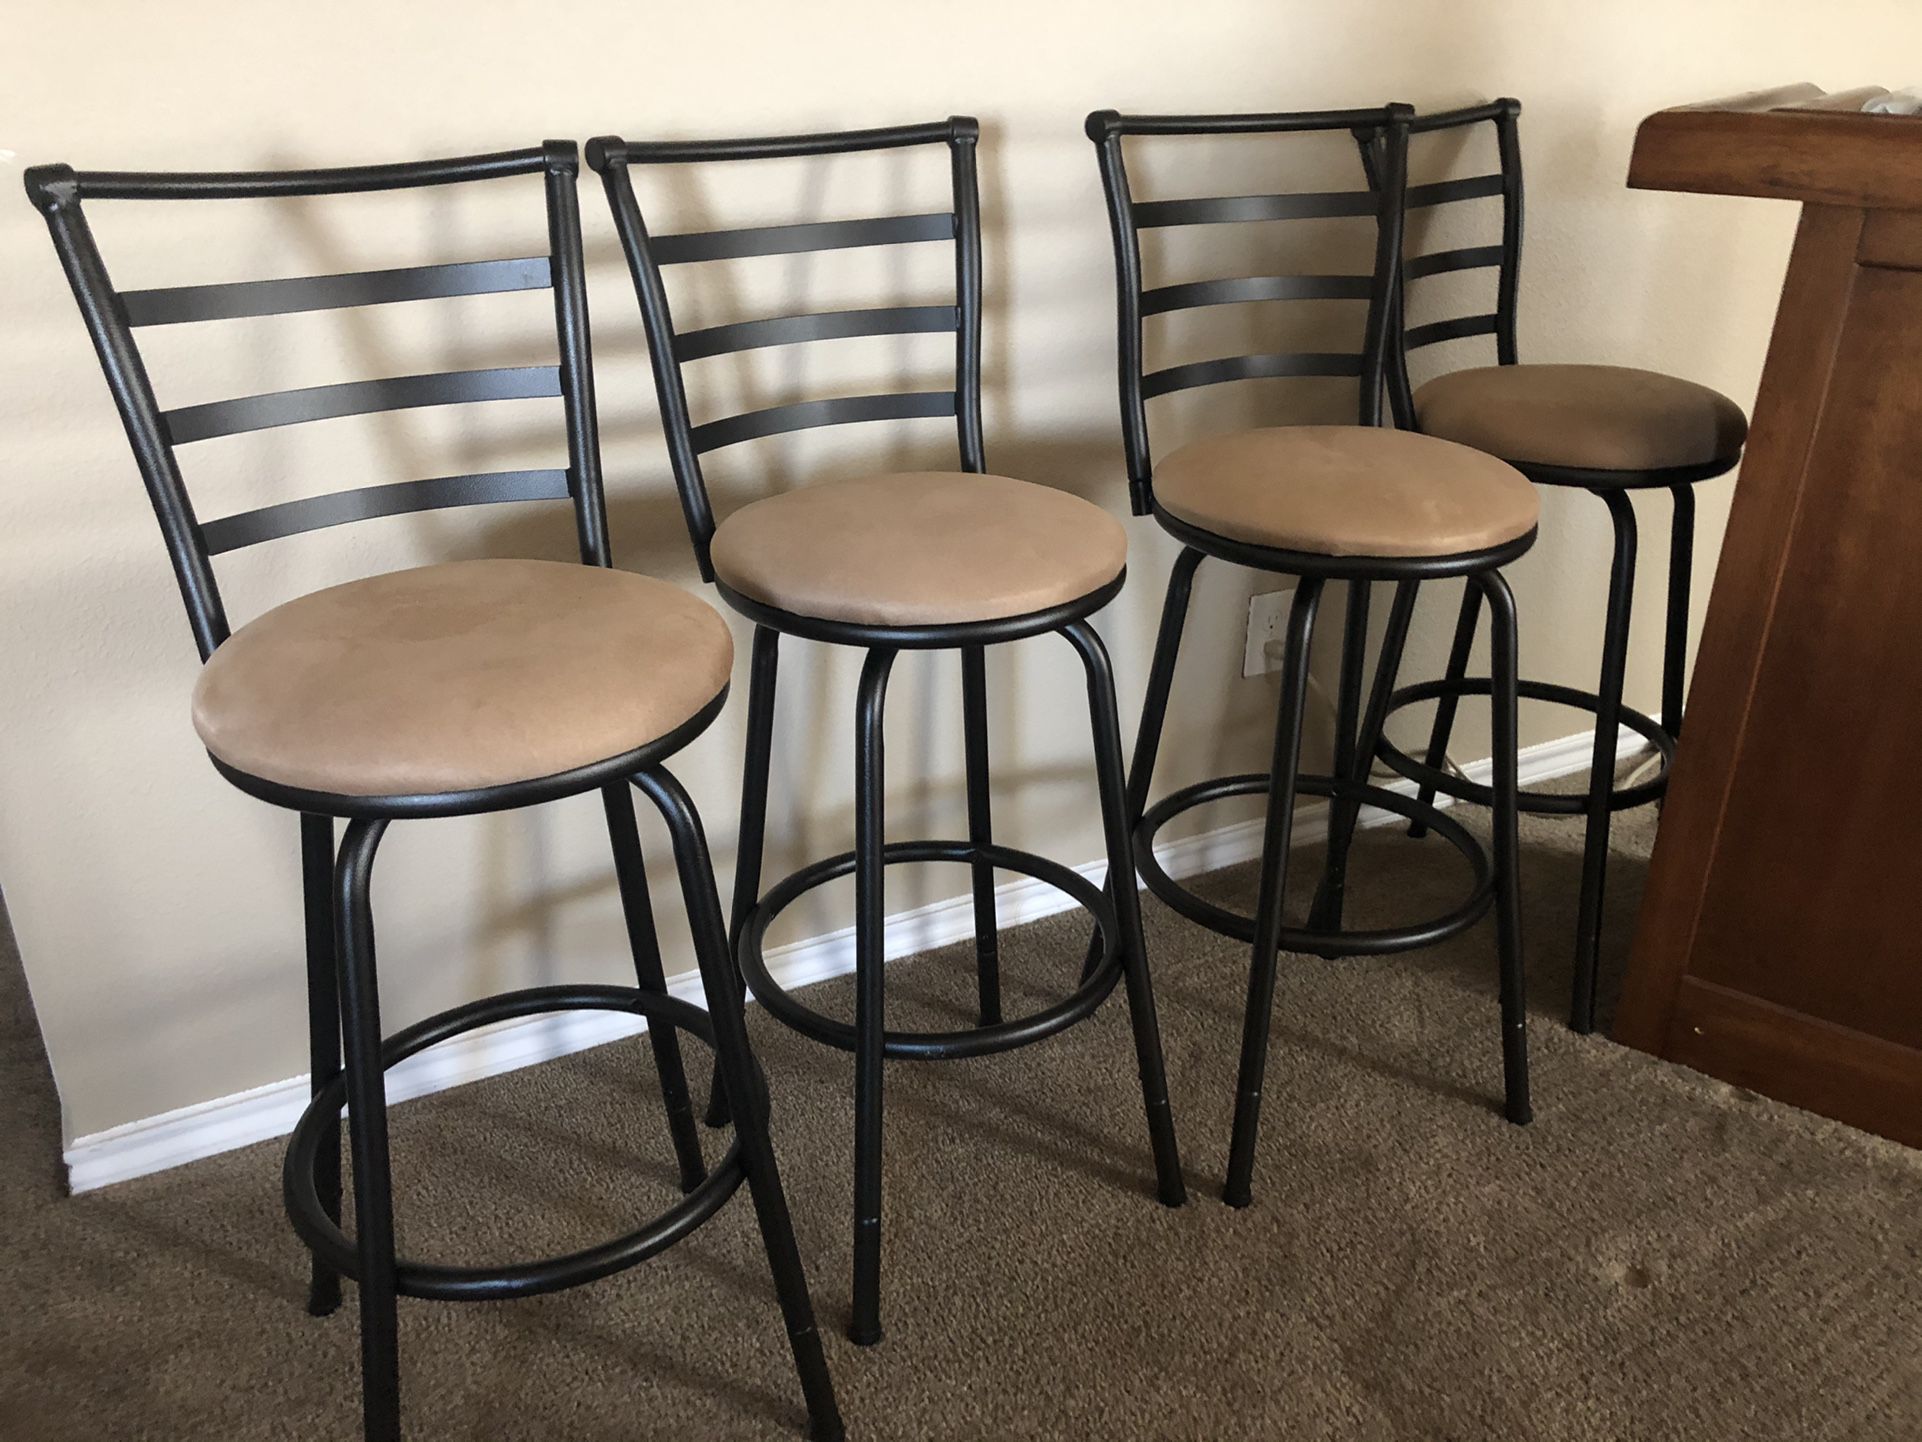 4 Brand new bar Stools /Never Used